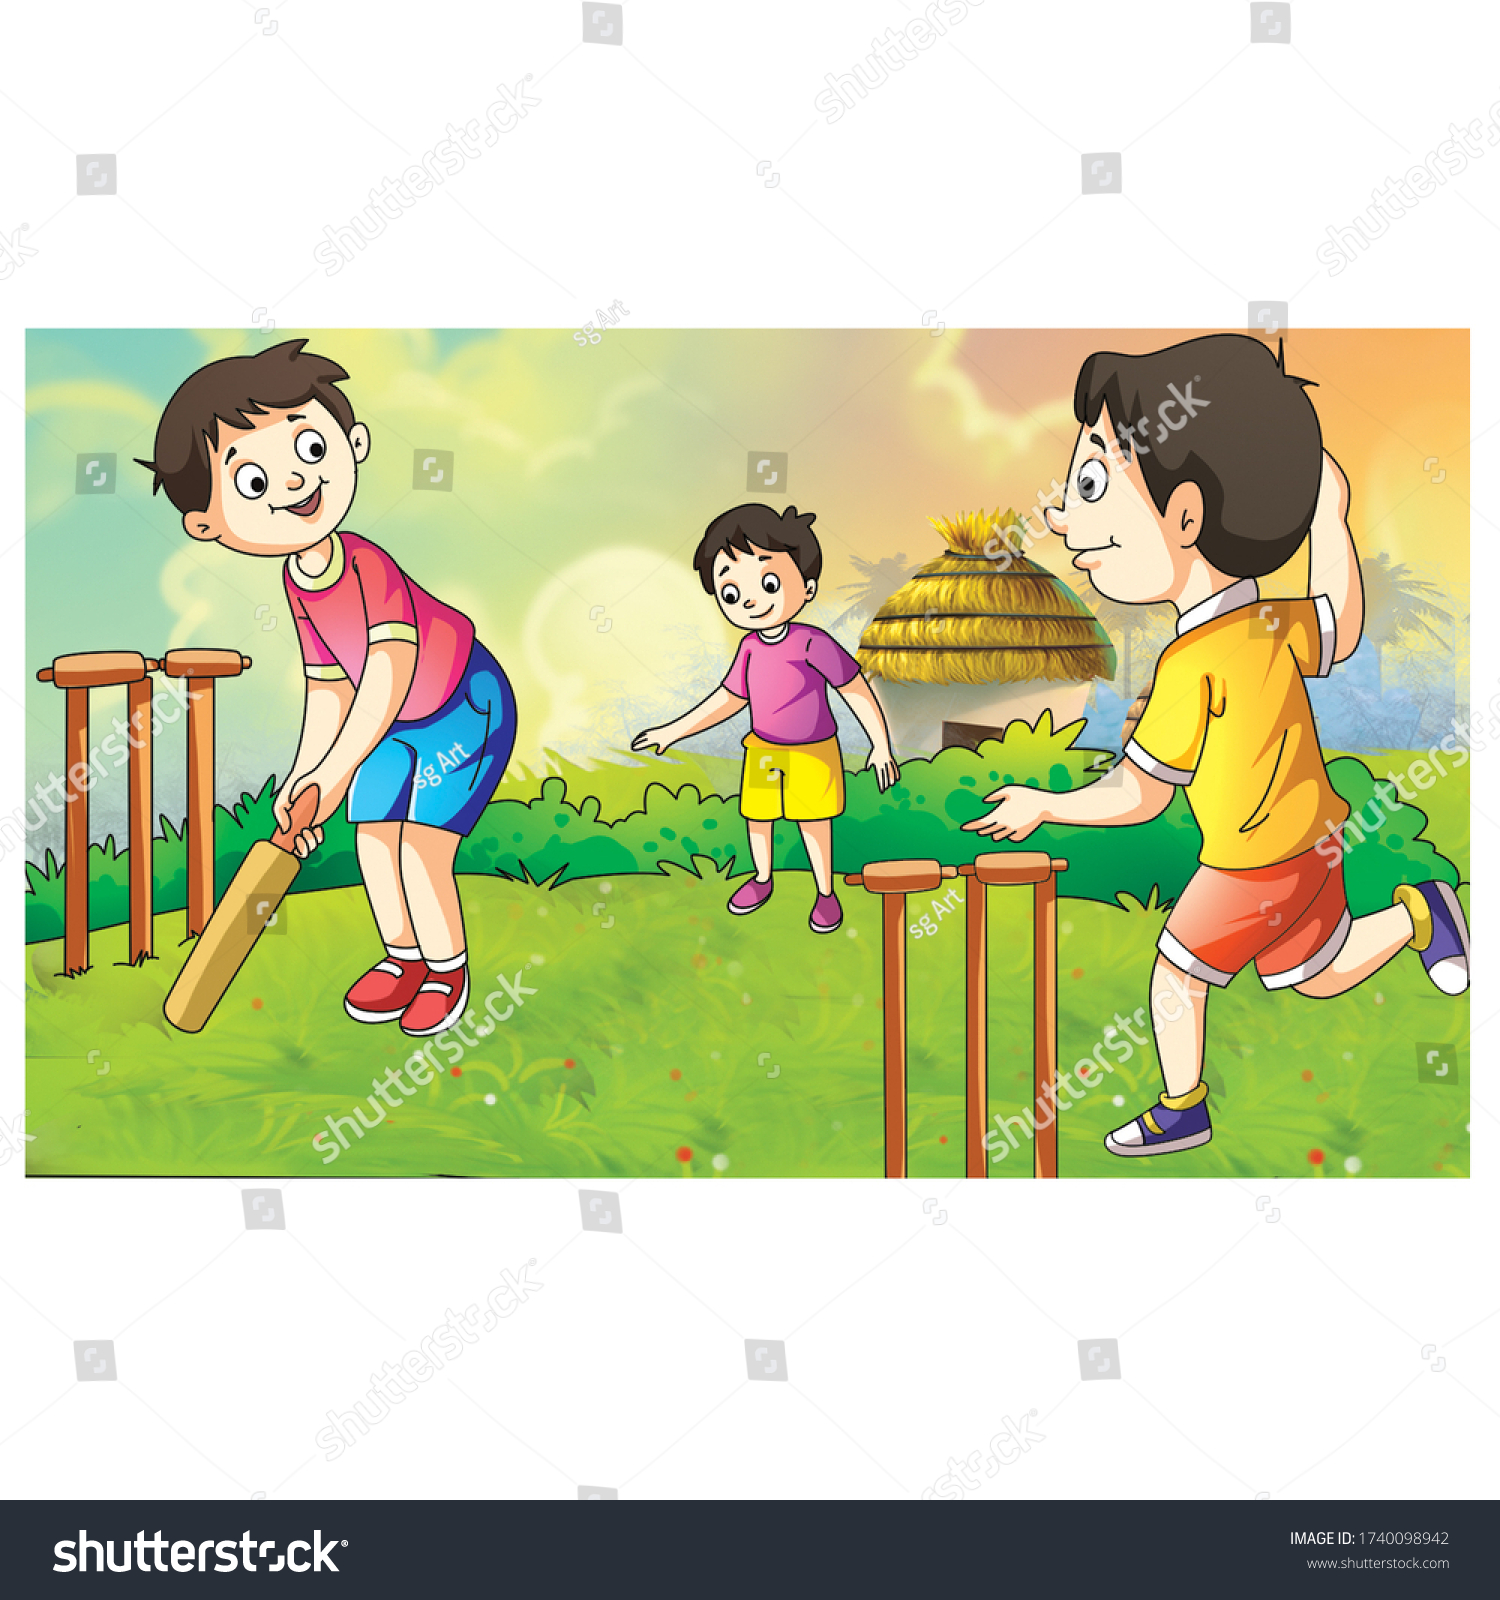 Boy playing cricket images stock photos vectors